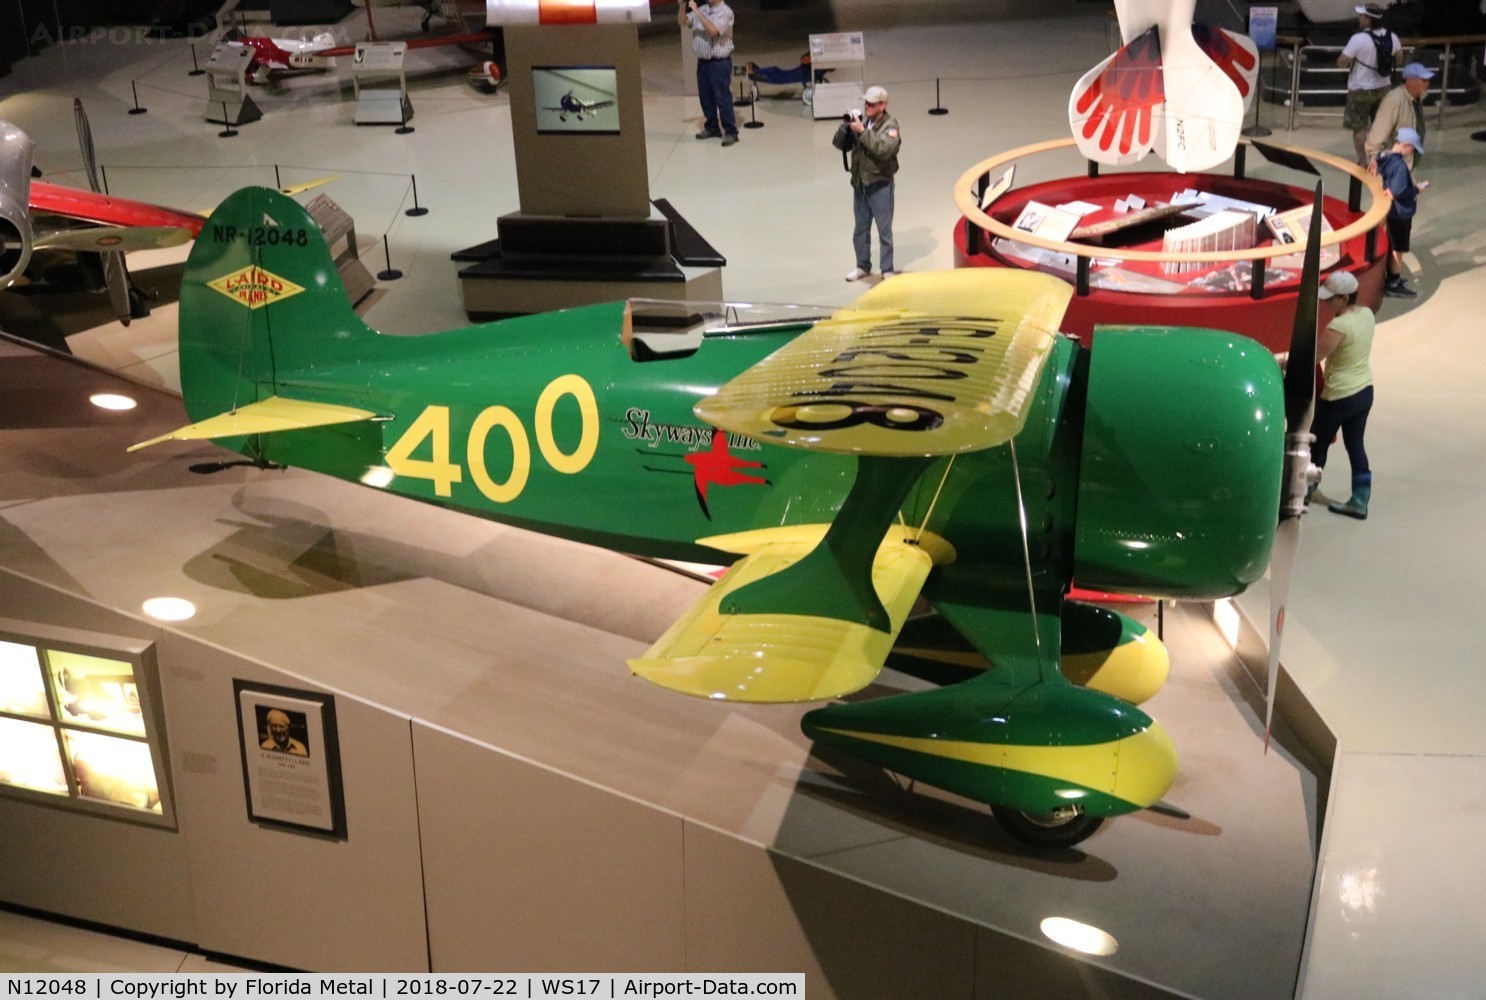 N12048, 2000 Laird LC-DW500 Super Solution Replica C/N 001, EAA Museum 2018